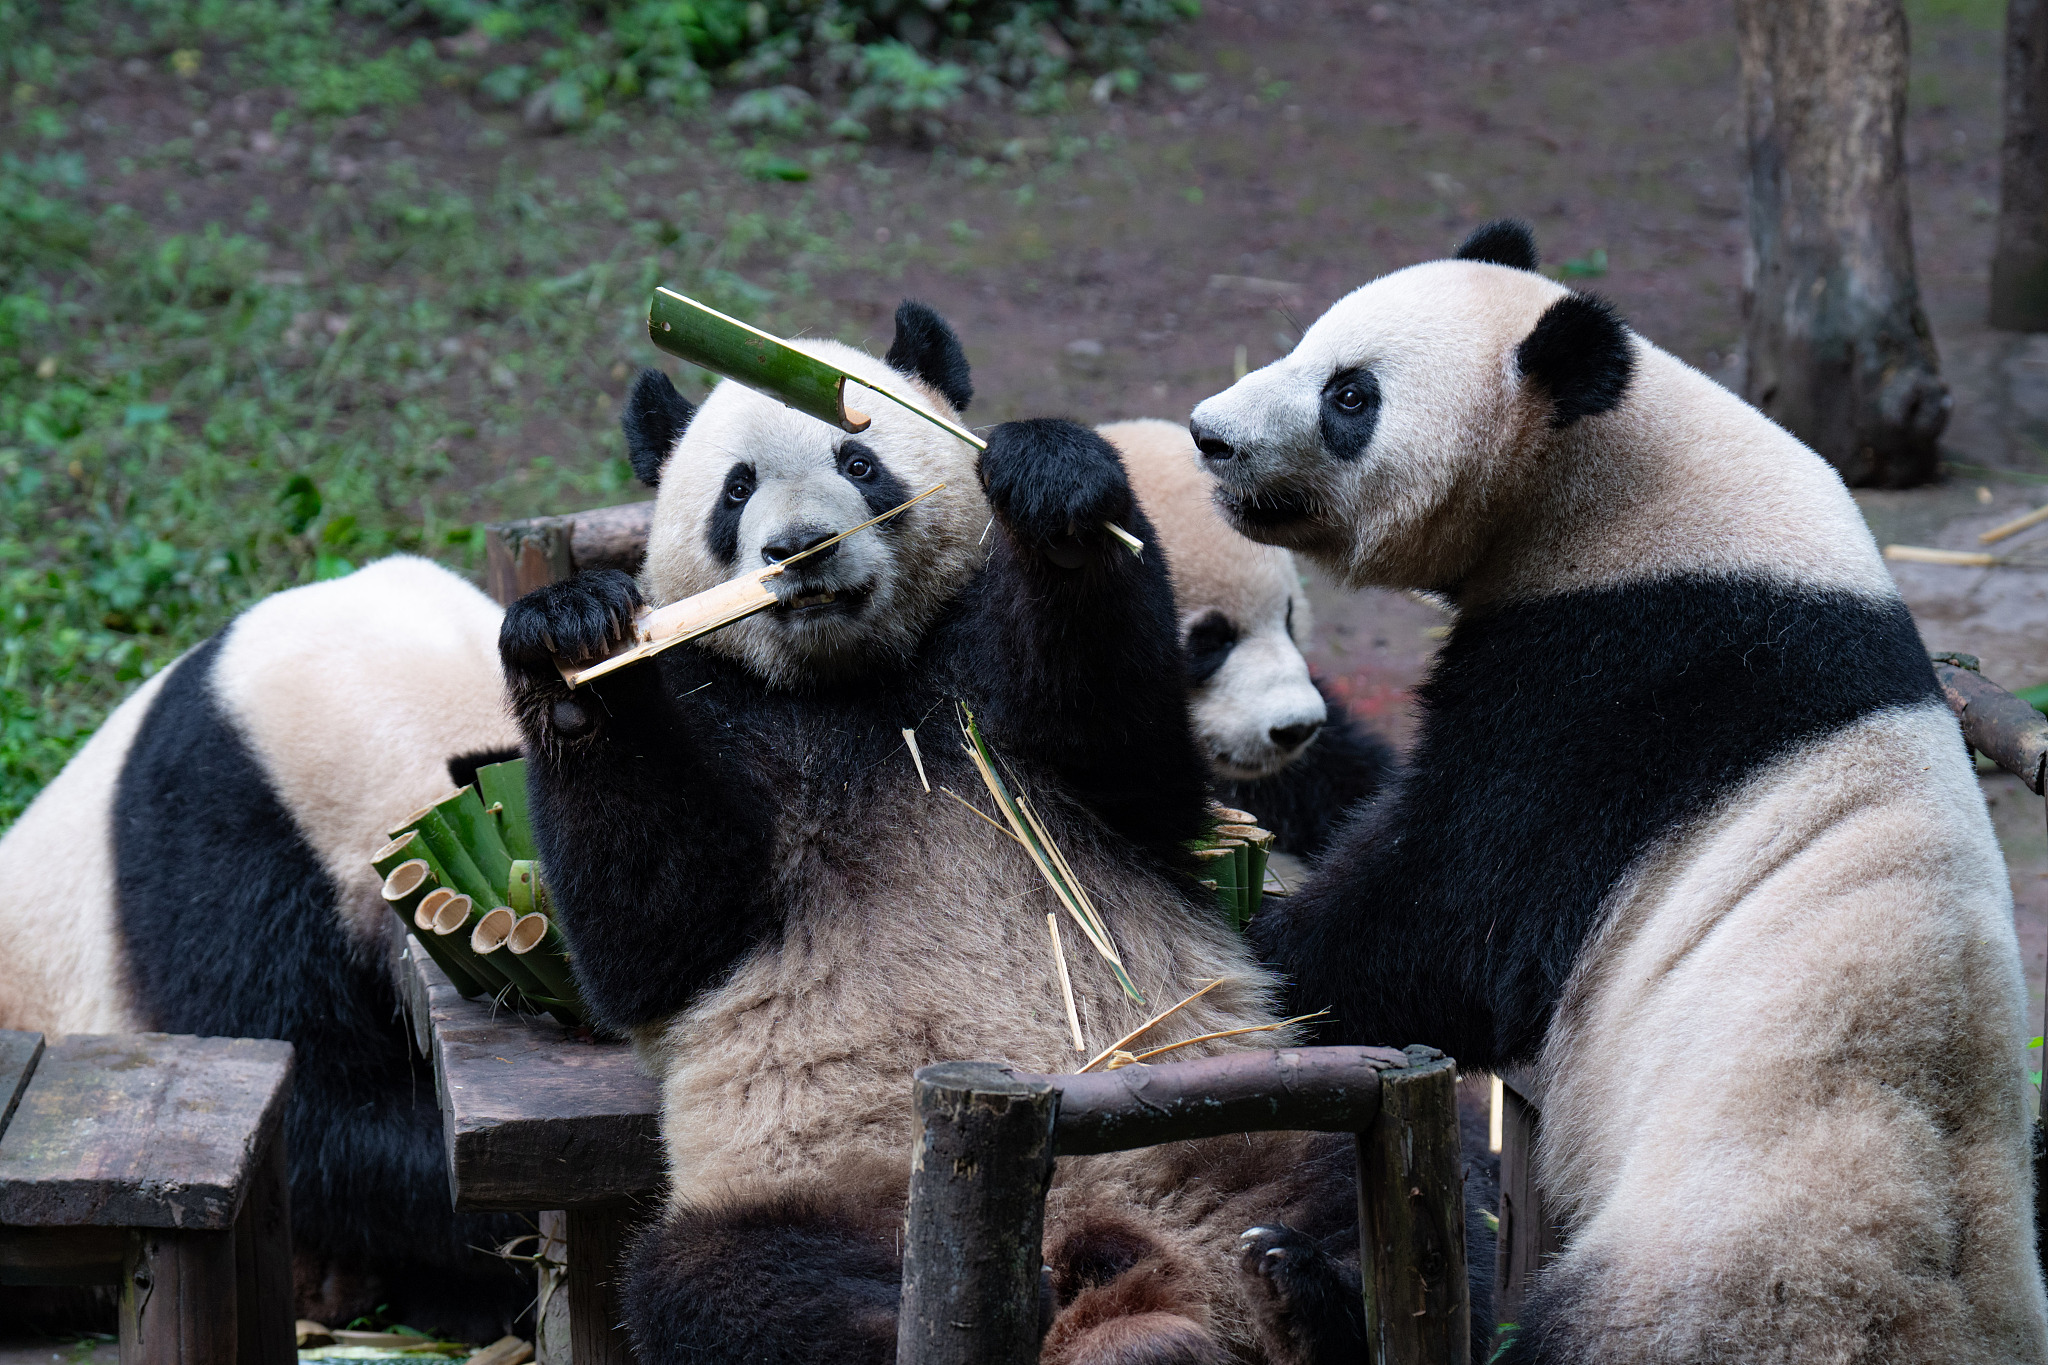 Shuangshuang and Chongchong, Xixi and Qingqing, two pairs of giant panda twins at the Chongqing Zoo, enjoy a birthday cake made of bamboo shoots and various kinds of fruits as part of their fifth birthday party in southwest China's Chongqing Municipality, June 23, 2024. /CFP